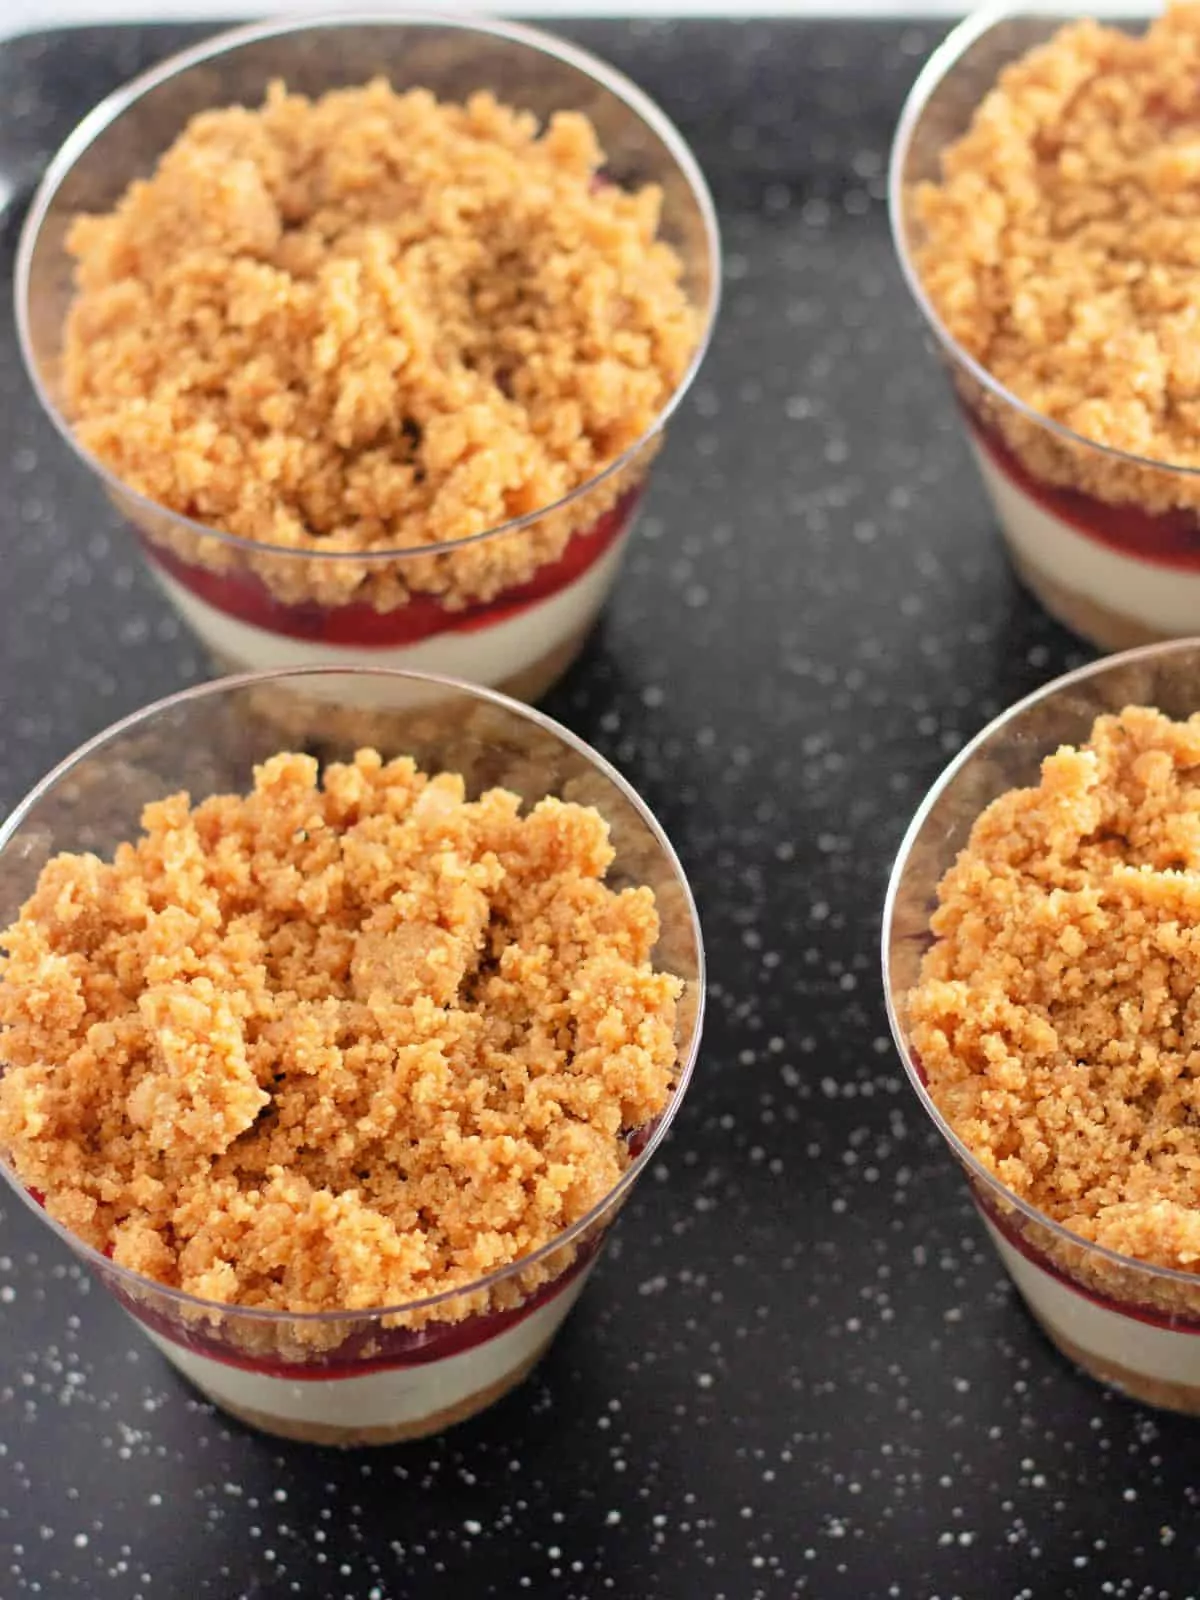 graham cracker crumbs in pudding cups.